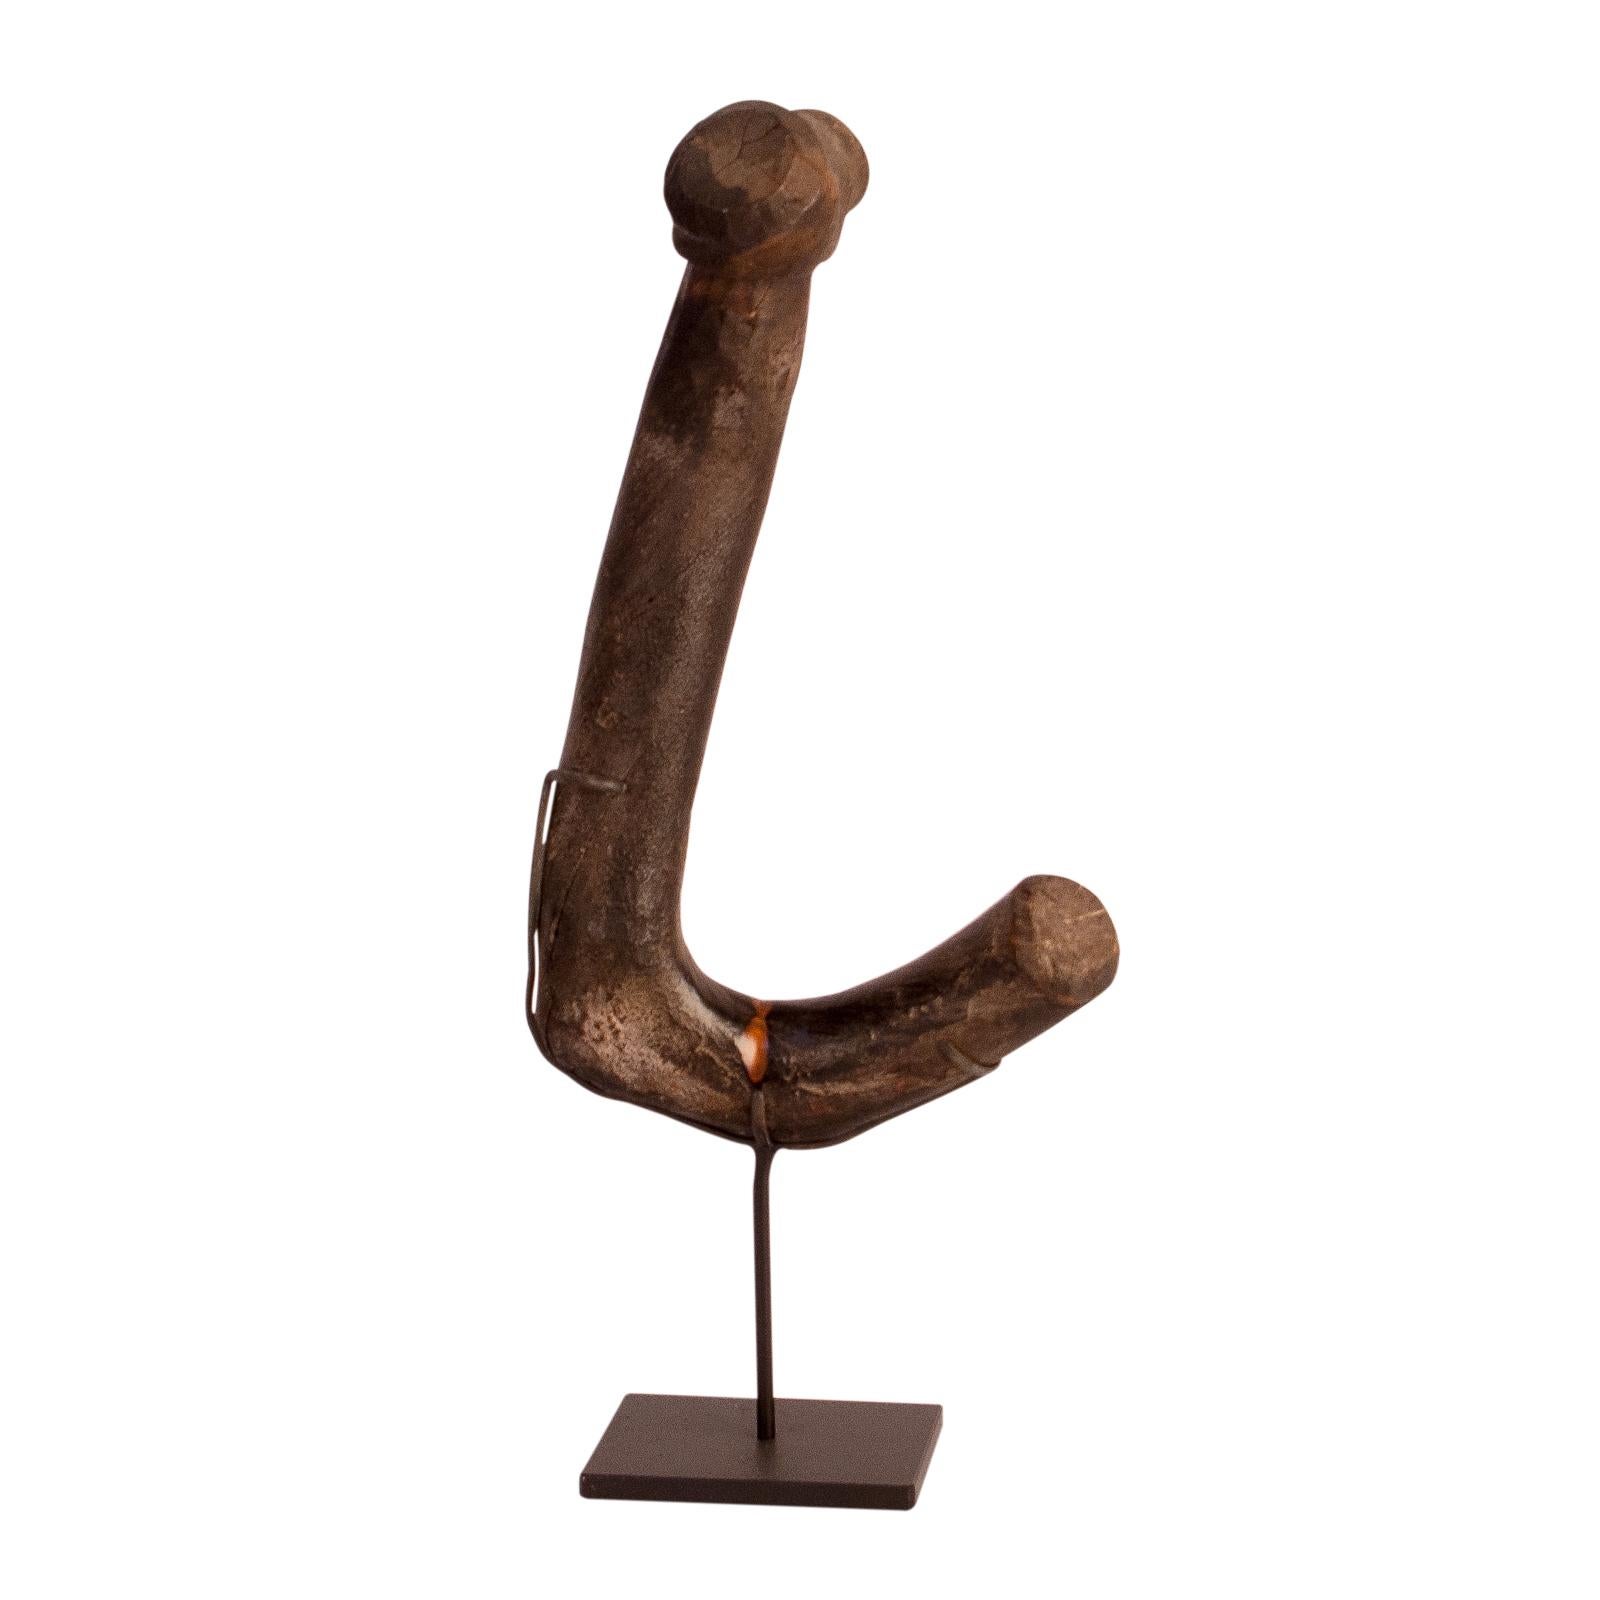 A curious and amusing Japanese wood kettle hook, circa 1880 on later custom stand. These decorative organic looking hooks where meant to hold a pot over a fire to keep its contents hot. We loved the wear and eccentric shape of the hook. We mounted